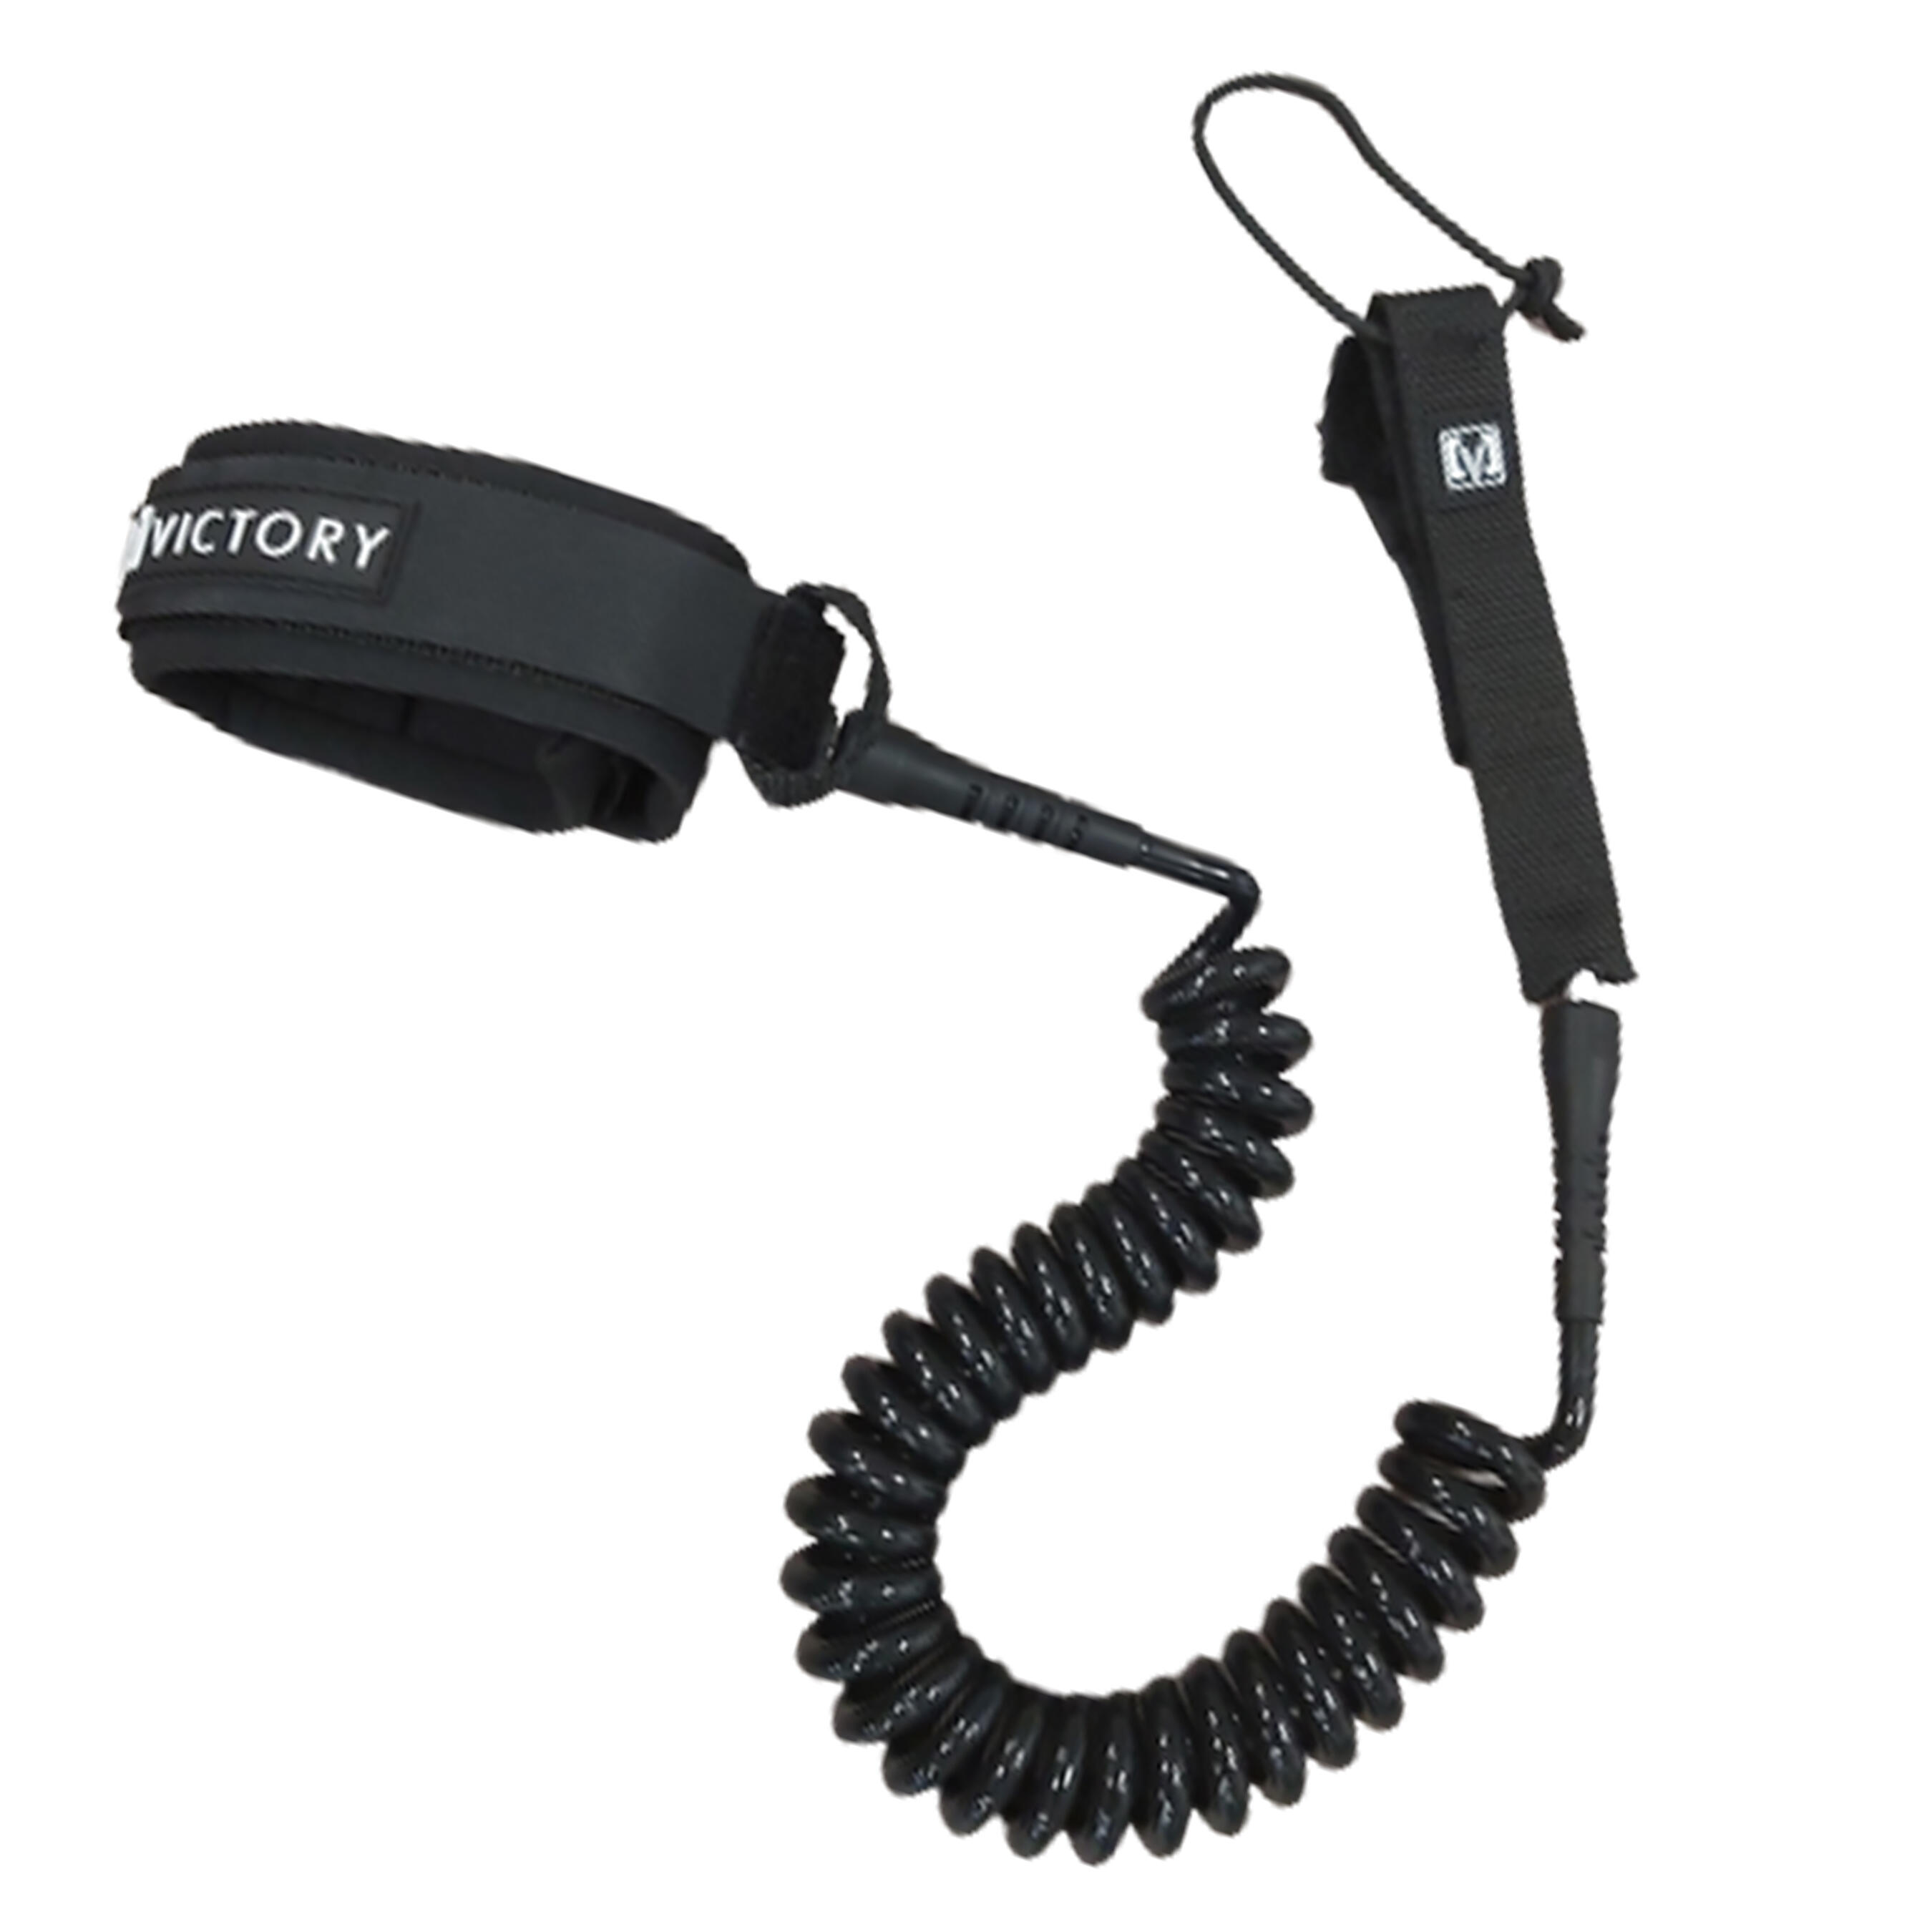 SURFSYSTEM Coiled leash for touring or racing stand-up paddle boards.